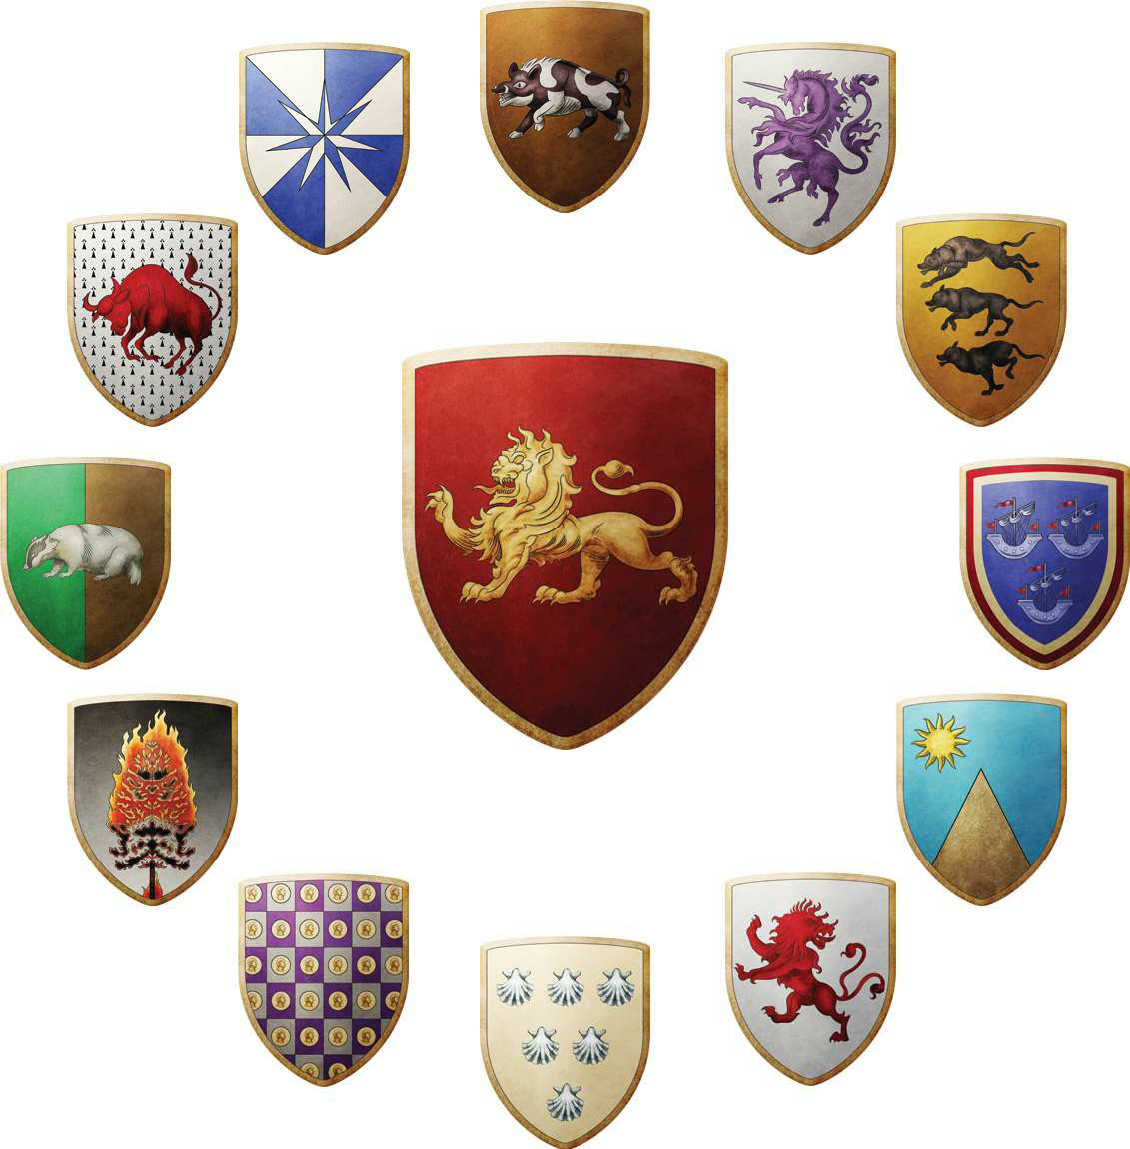 Westeros - A Wiki of Ice and Fire